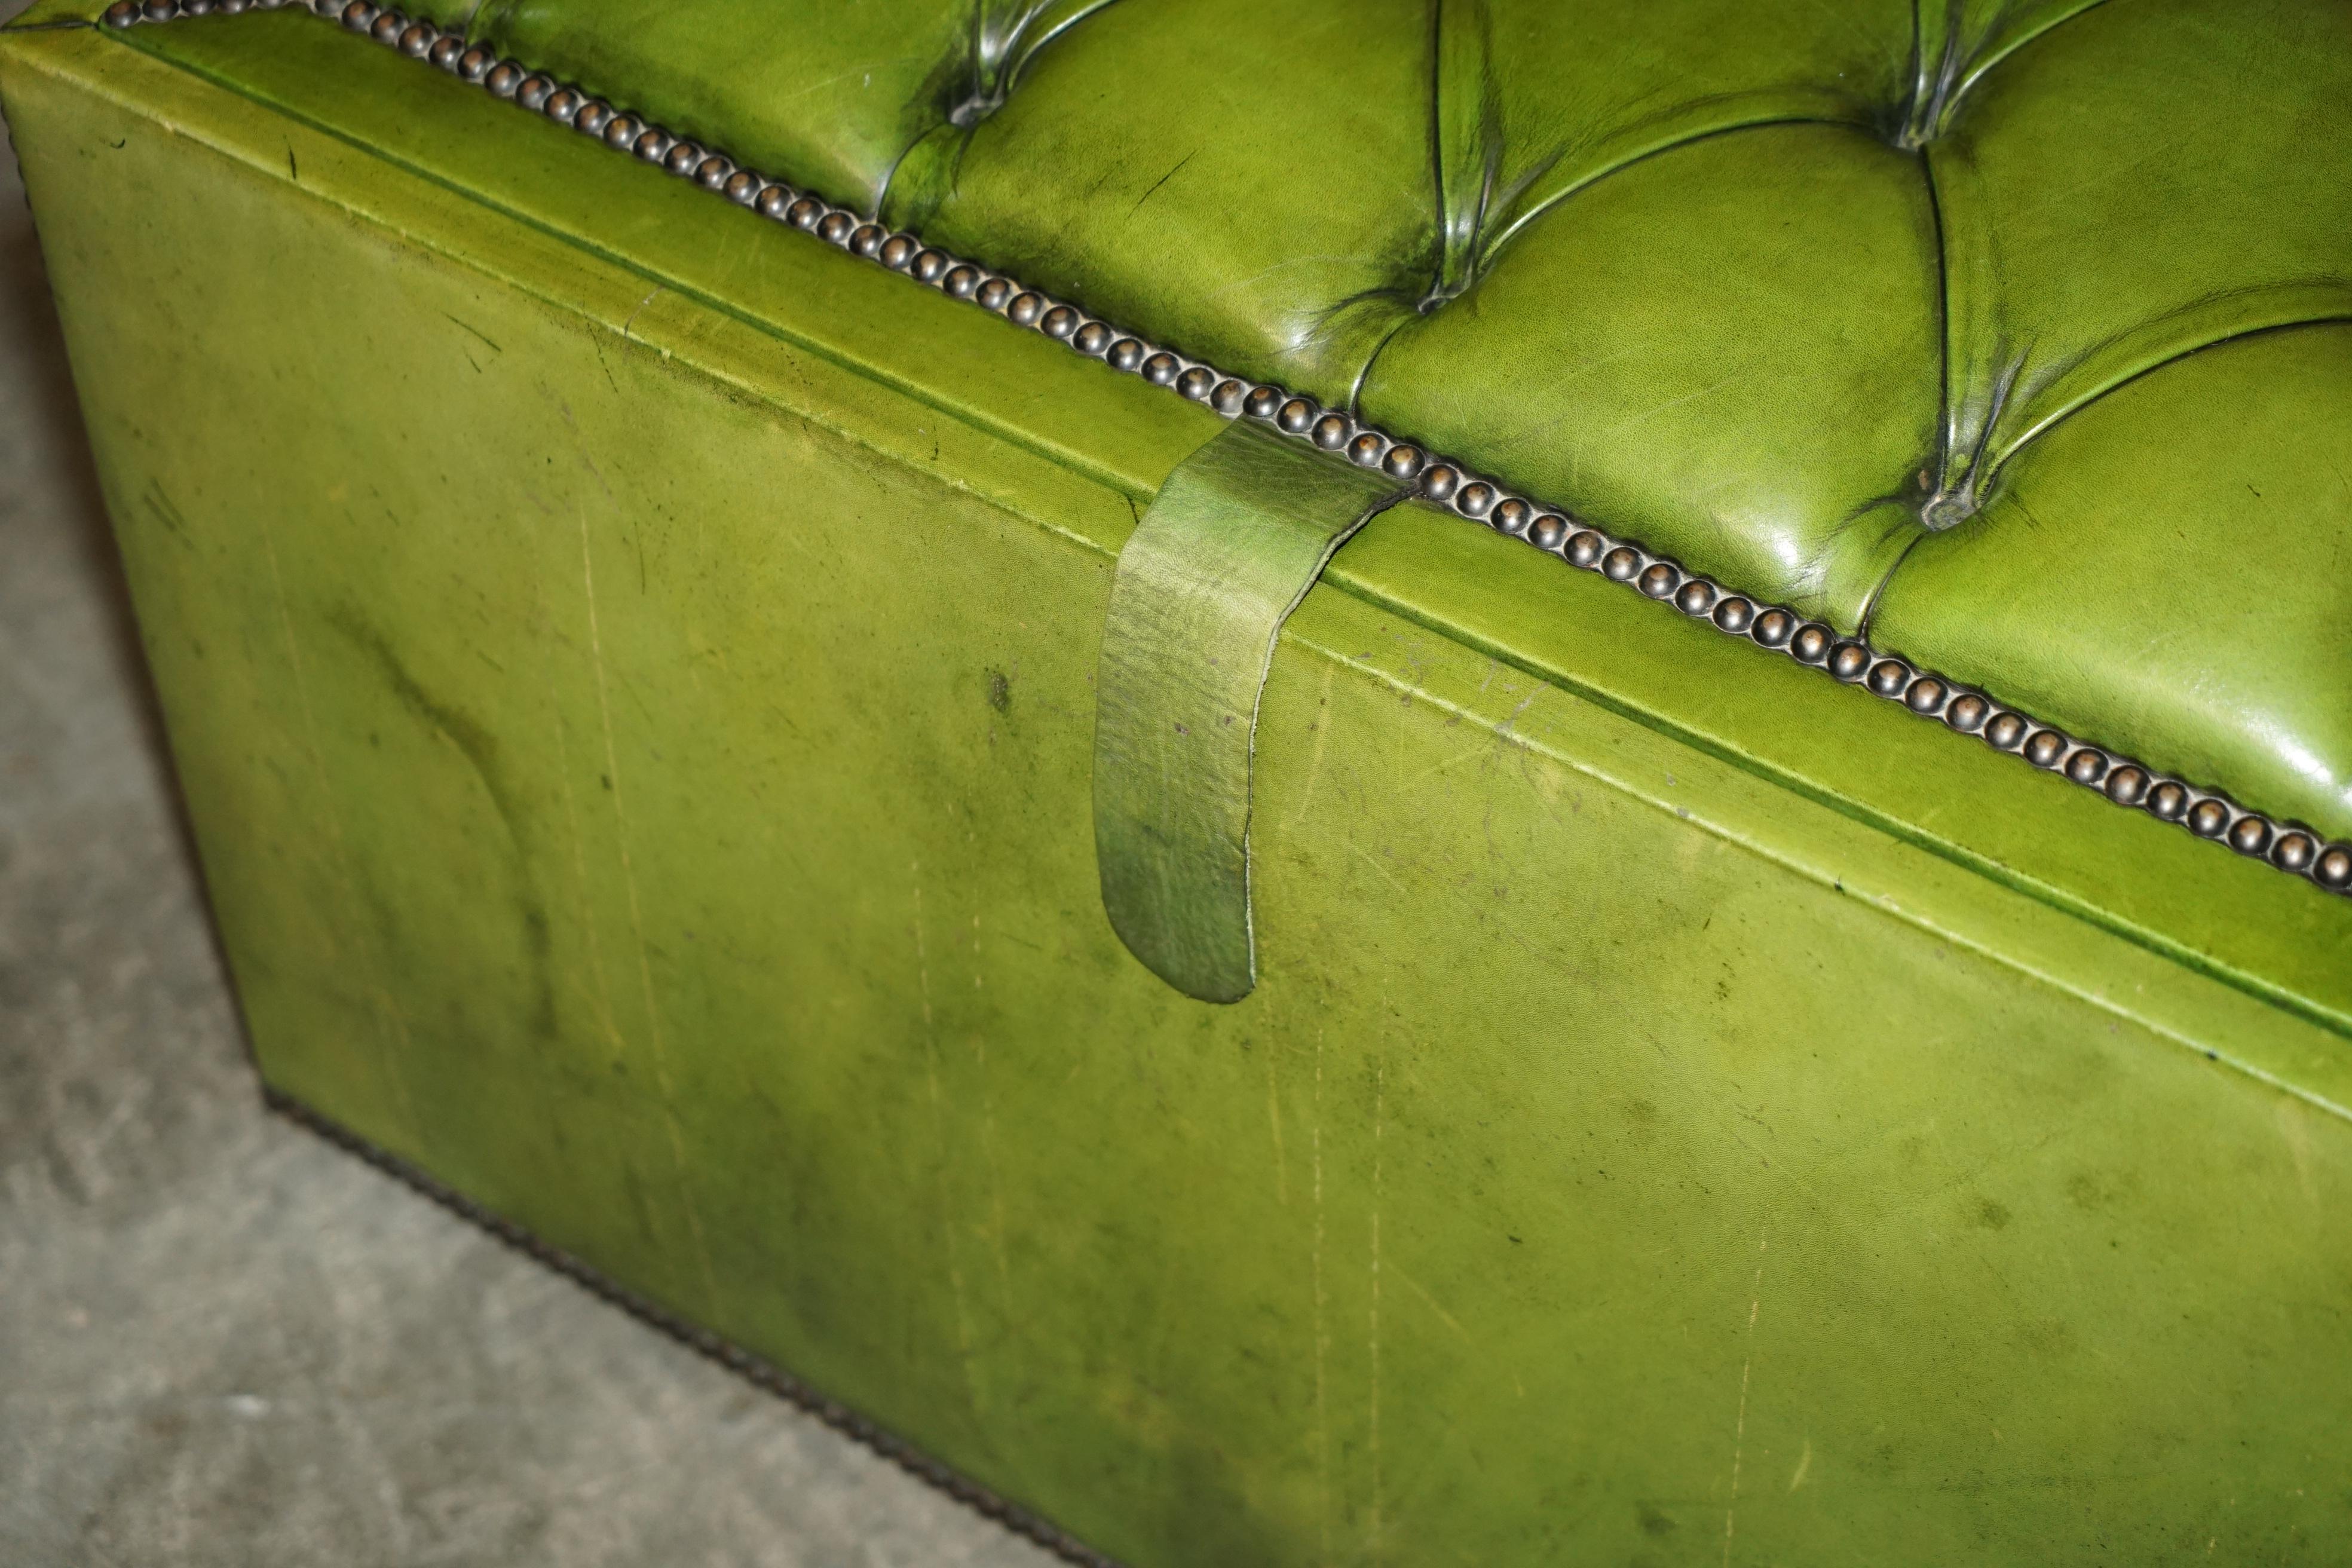 ANTiQUE GREEN LEATHER CHESTERFIELD OTTOMAN BENCH SEAT REVERSIBLE COFFEE TABLE For Sale 5